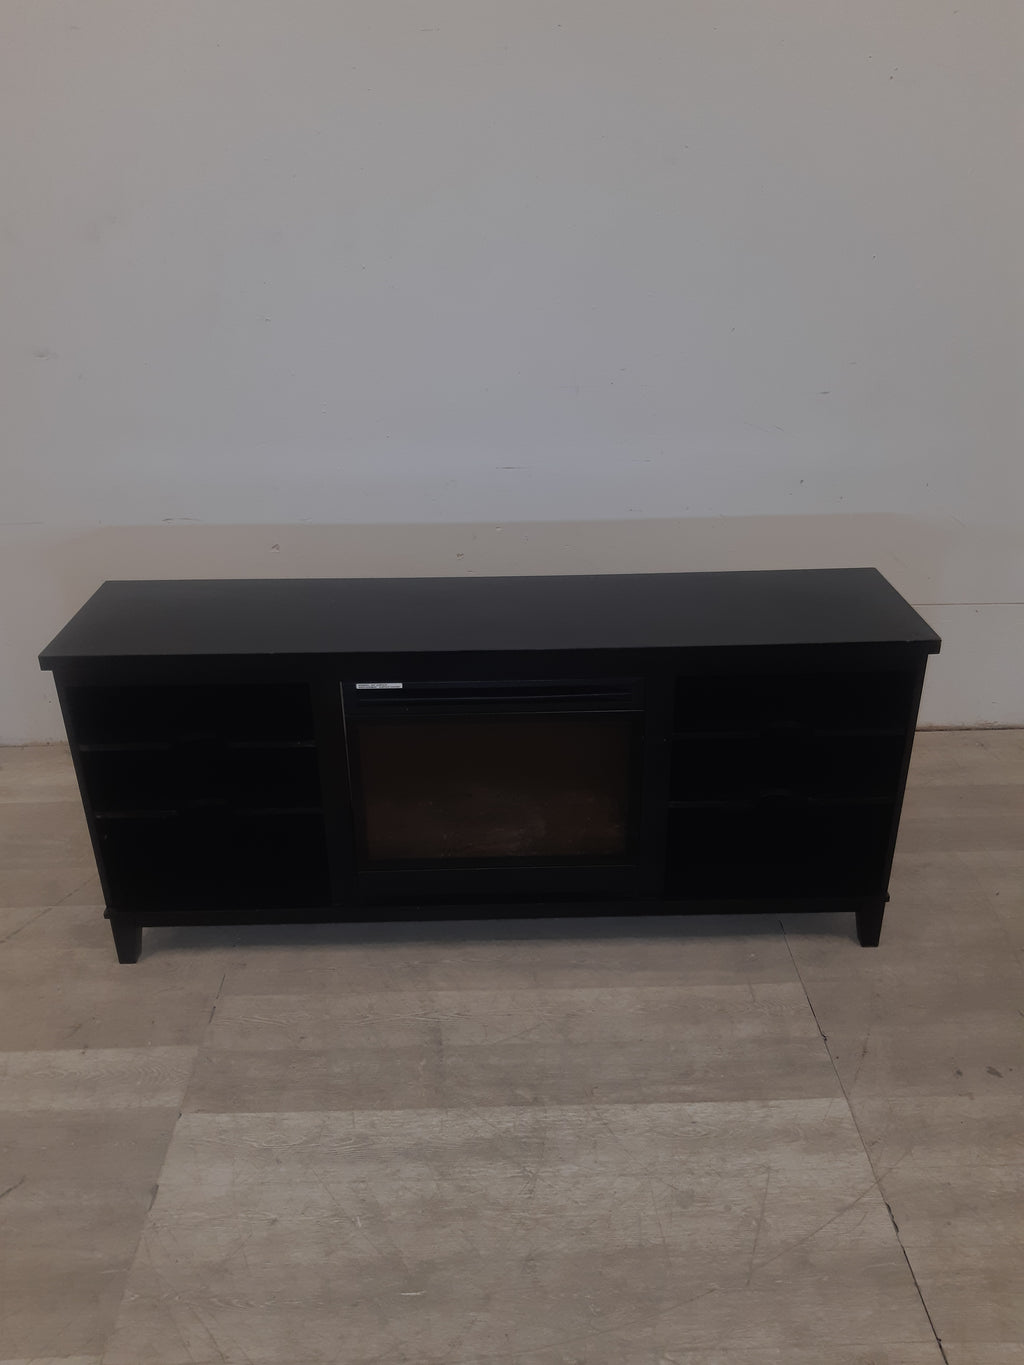 T.V Stand With Fireplace